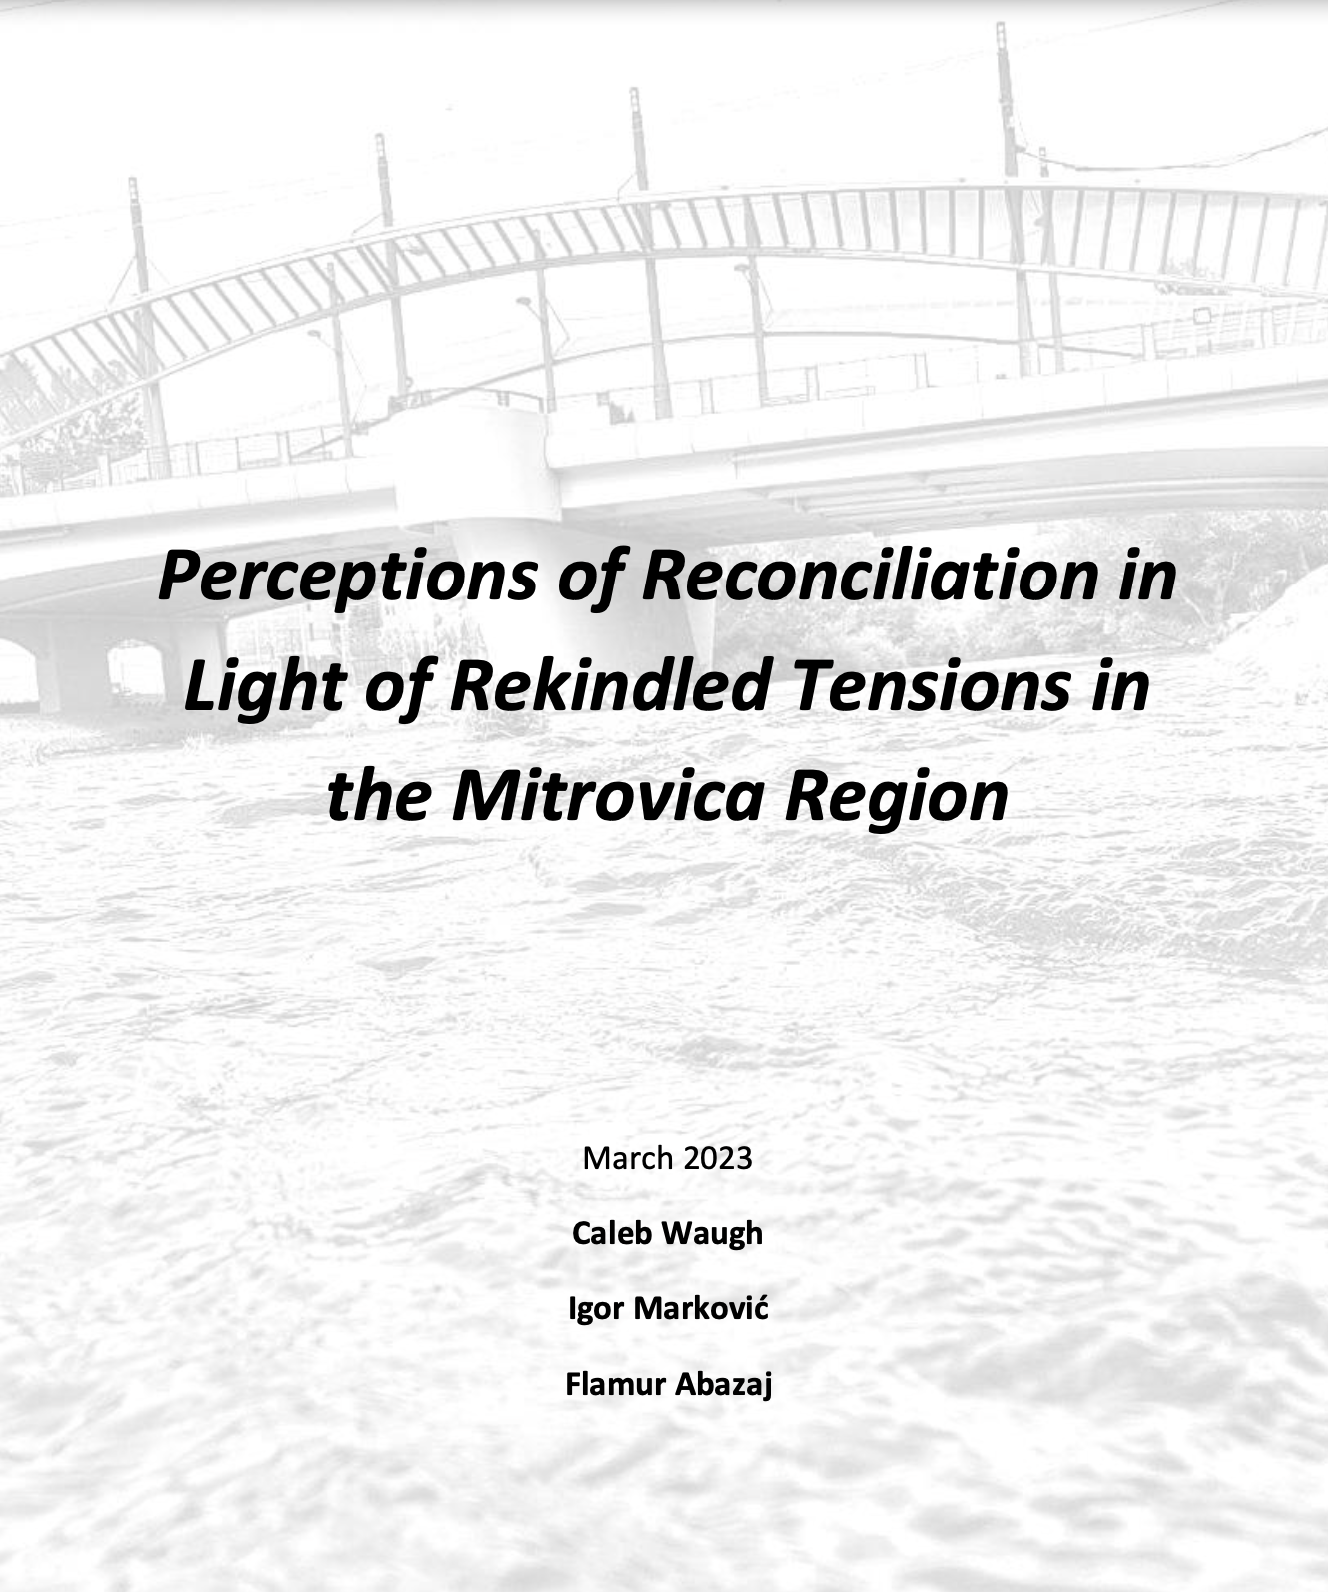 Perceptions of Reconciliation in Light of Rekindled Tensions in the Mitrovica Region